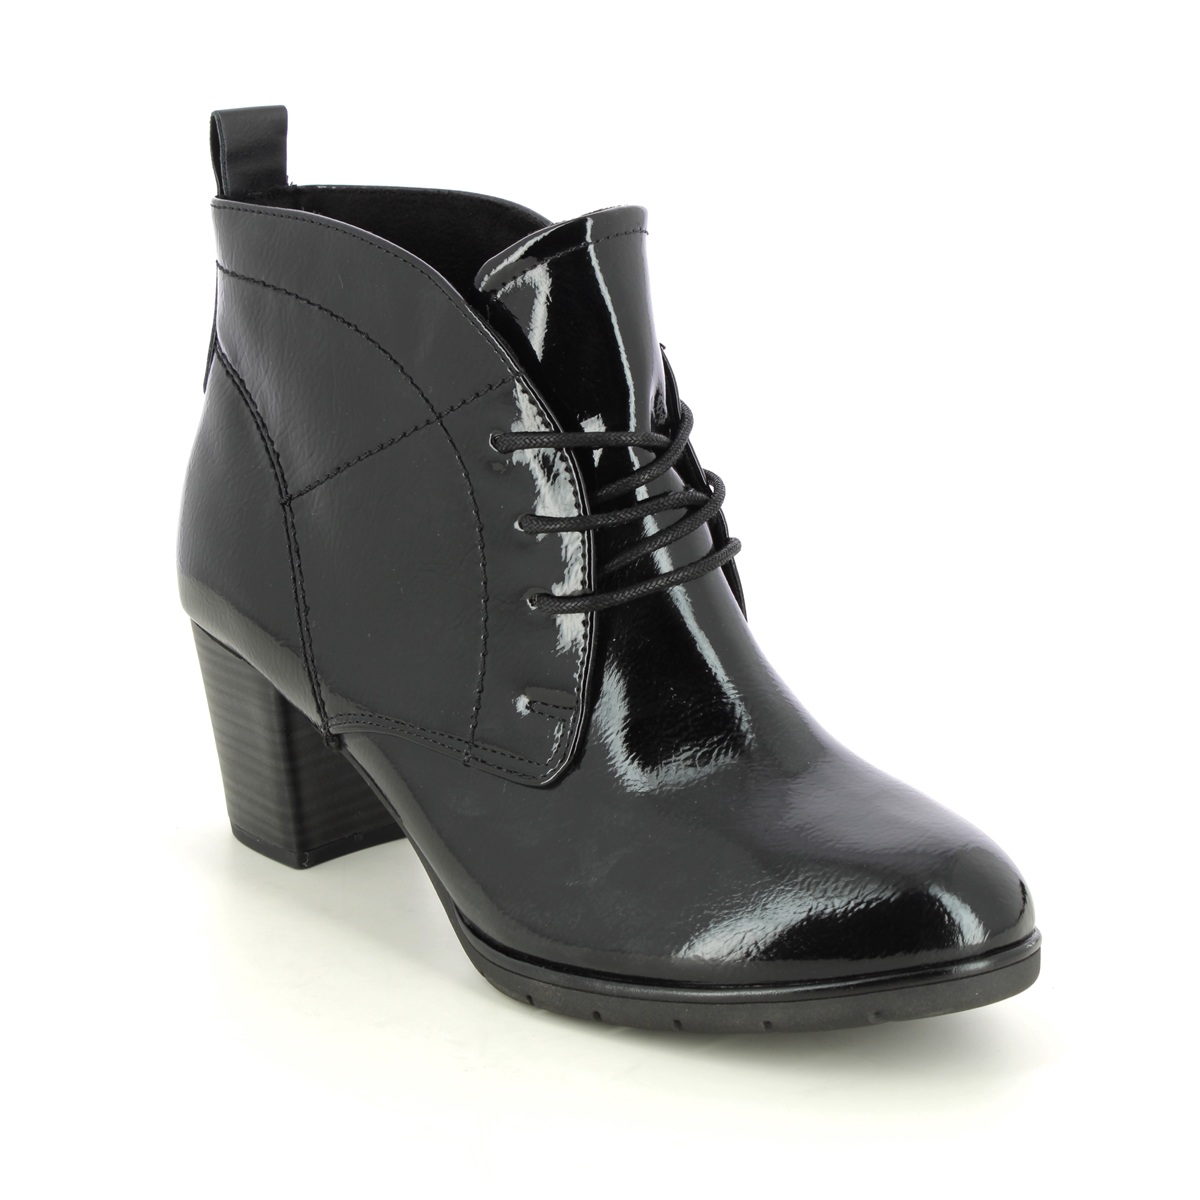 Marco Tozzi Pepalow Black Patent Womens Heeled Boots 25109-41-018 In Size 36 In Plain Black Patent